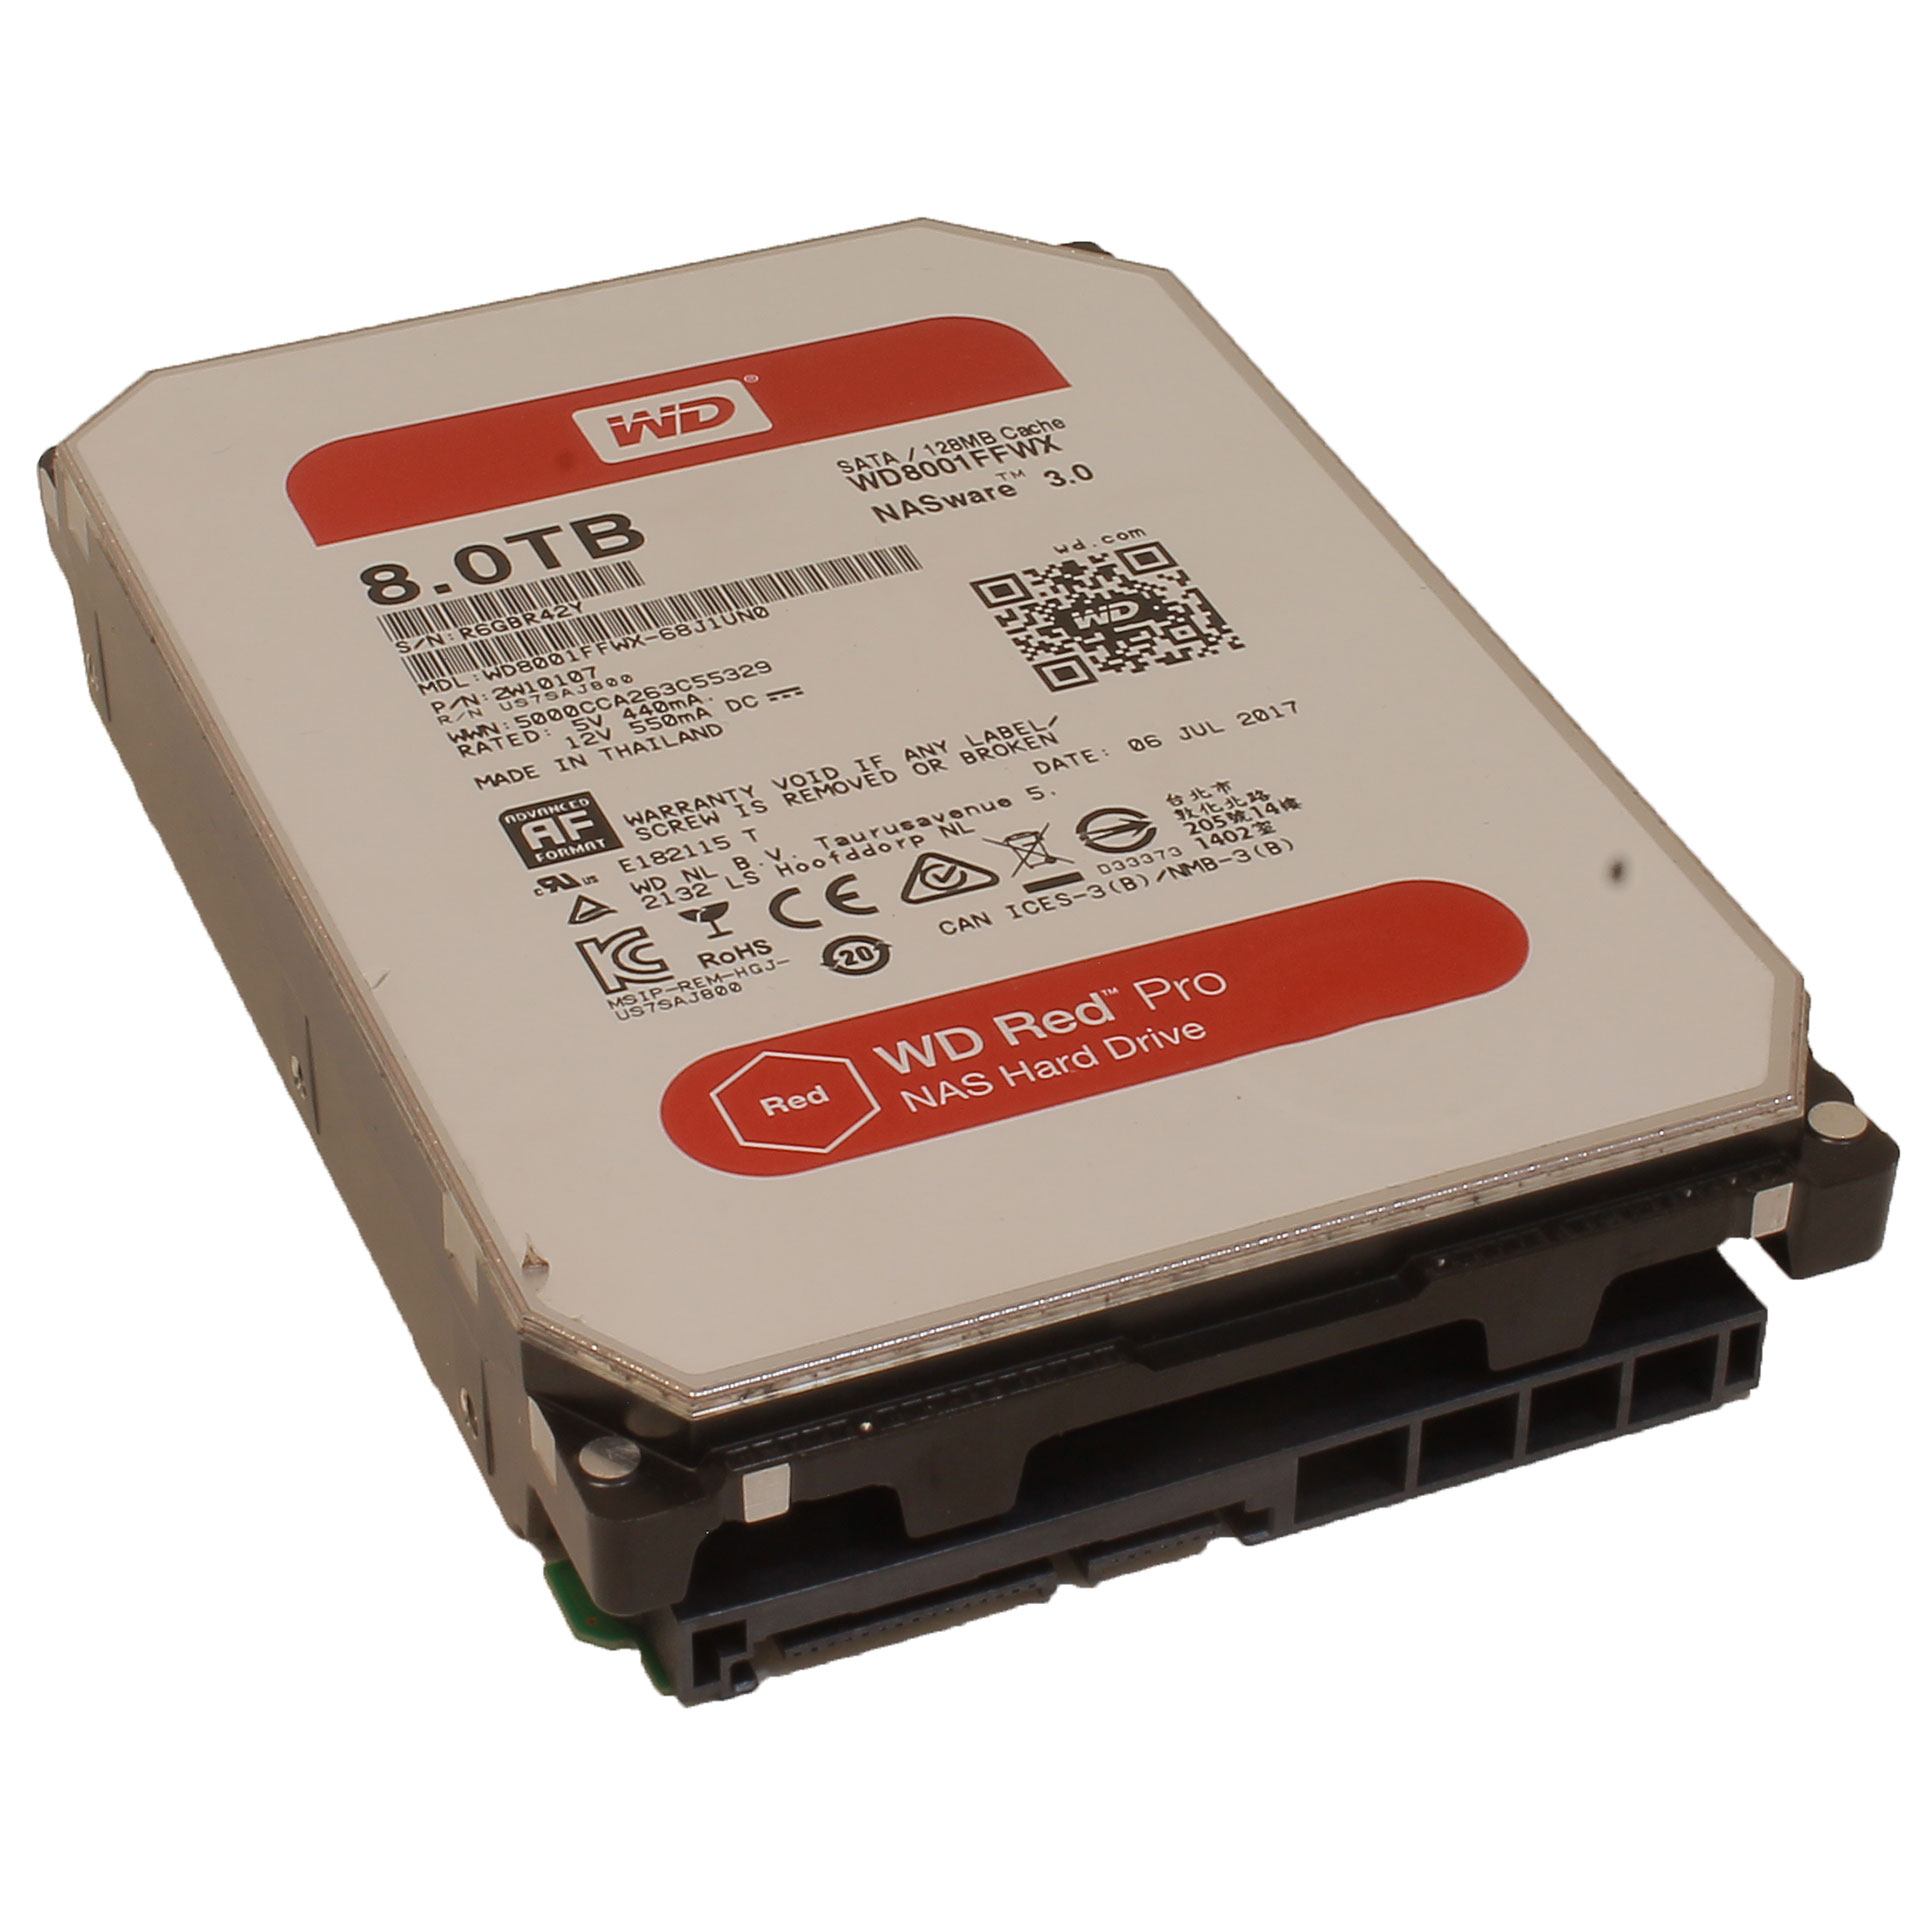 Disque dur WD Red Plus NAS 8To 3.5 7200 tr/min (WD80EFBX)